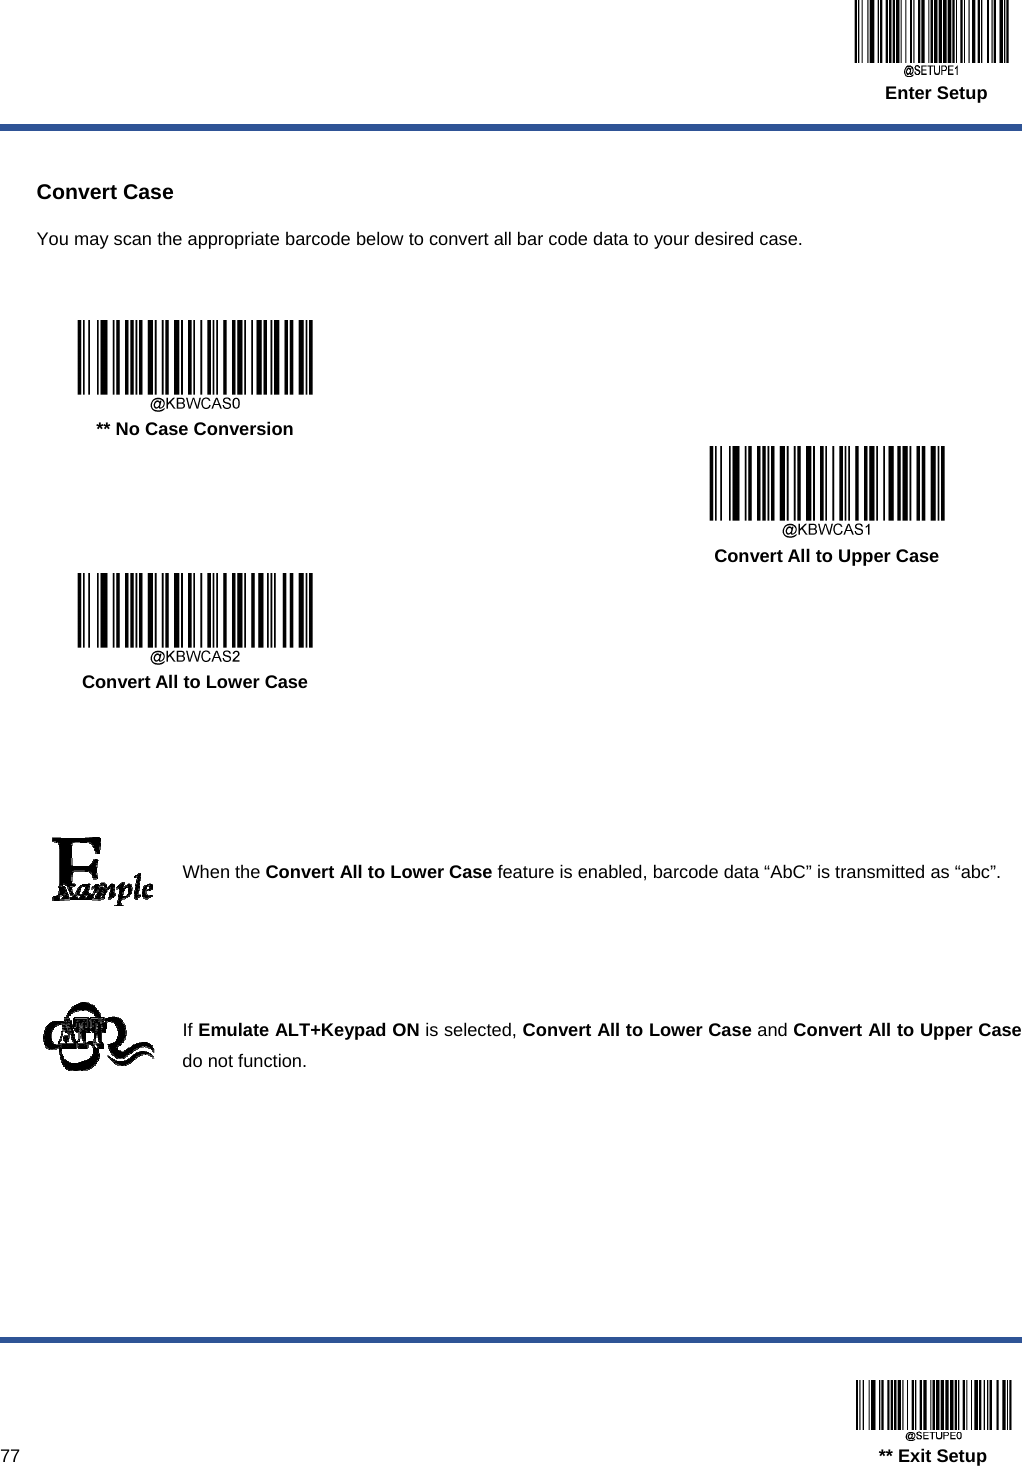  Enter Setup  77                                                                                  ** Exit Setup  Convert Case You may scan the appropriate barcode below to convert all bar code data to your desired case.      ** No Case Conversion      Convert All to Upper Case  Convert All to Lower Case        When the Convert All to Lower Case feature is enabled, barcode data “AbC” is transmitted as “abc”.     If Emulate ALT+Keypad ON is selected, Convert All to Lower Case and Convert All to Upper Case do not function.  